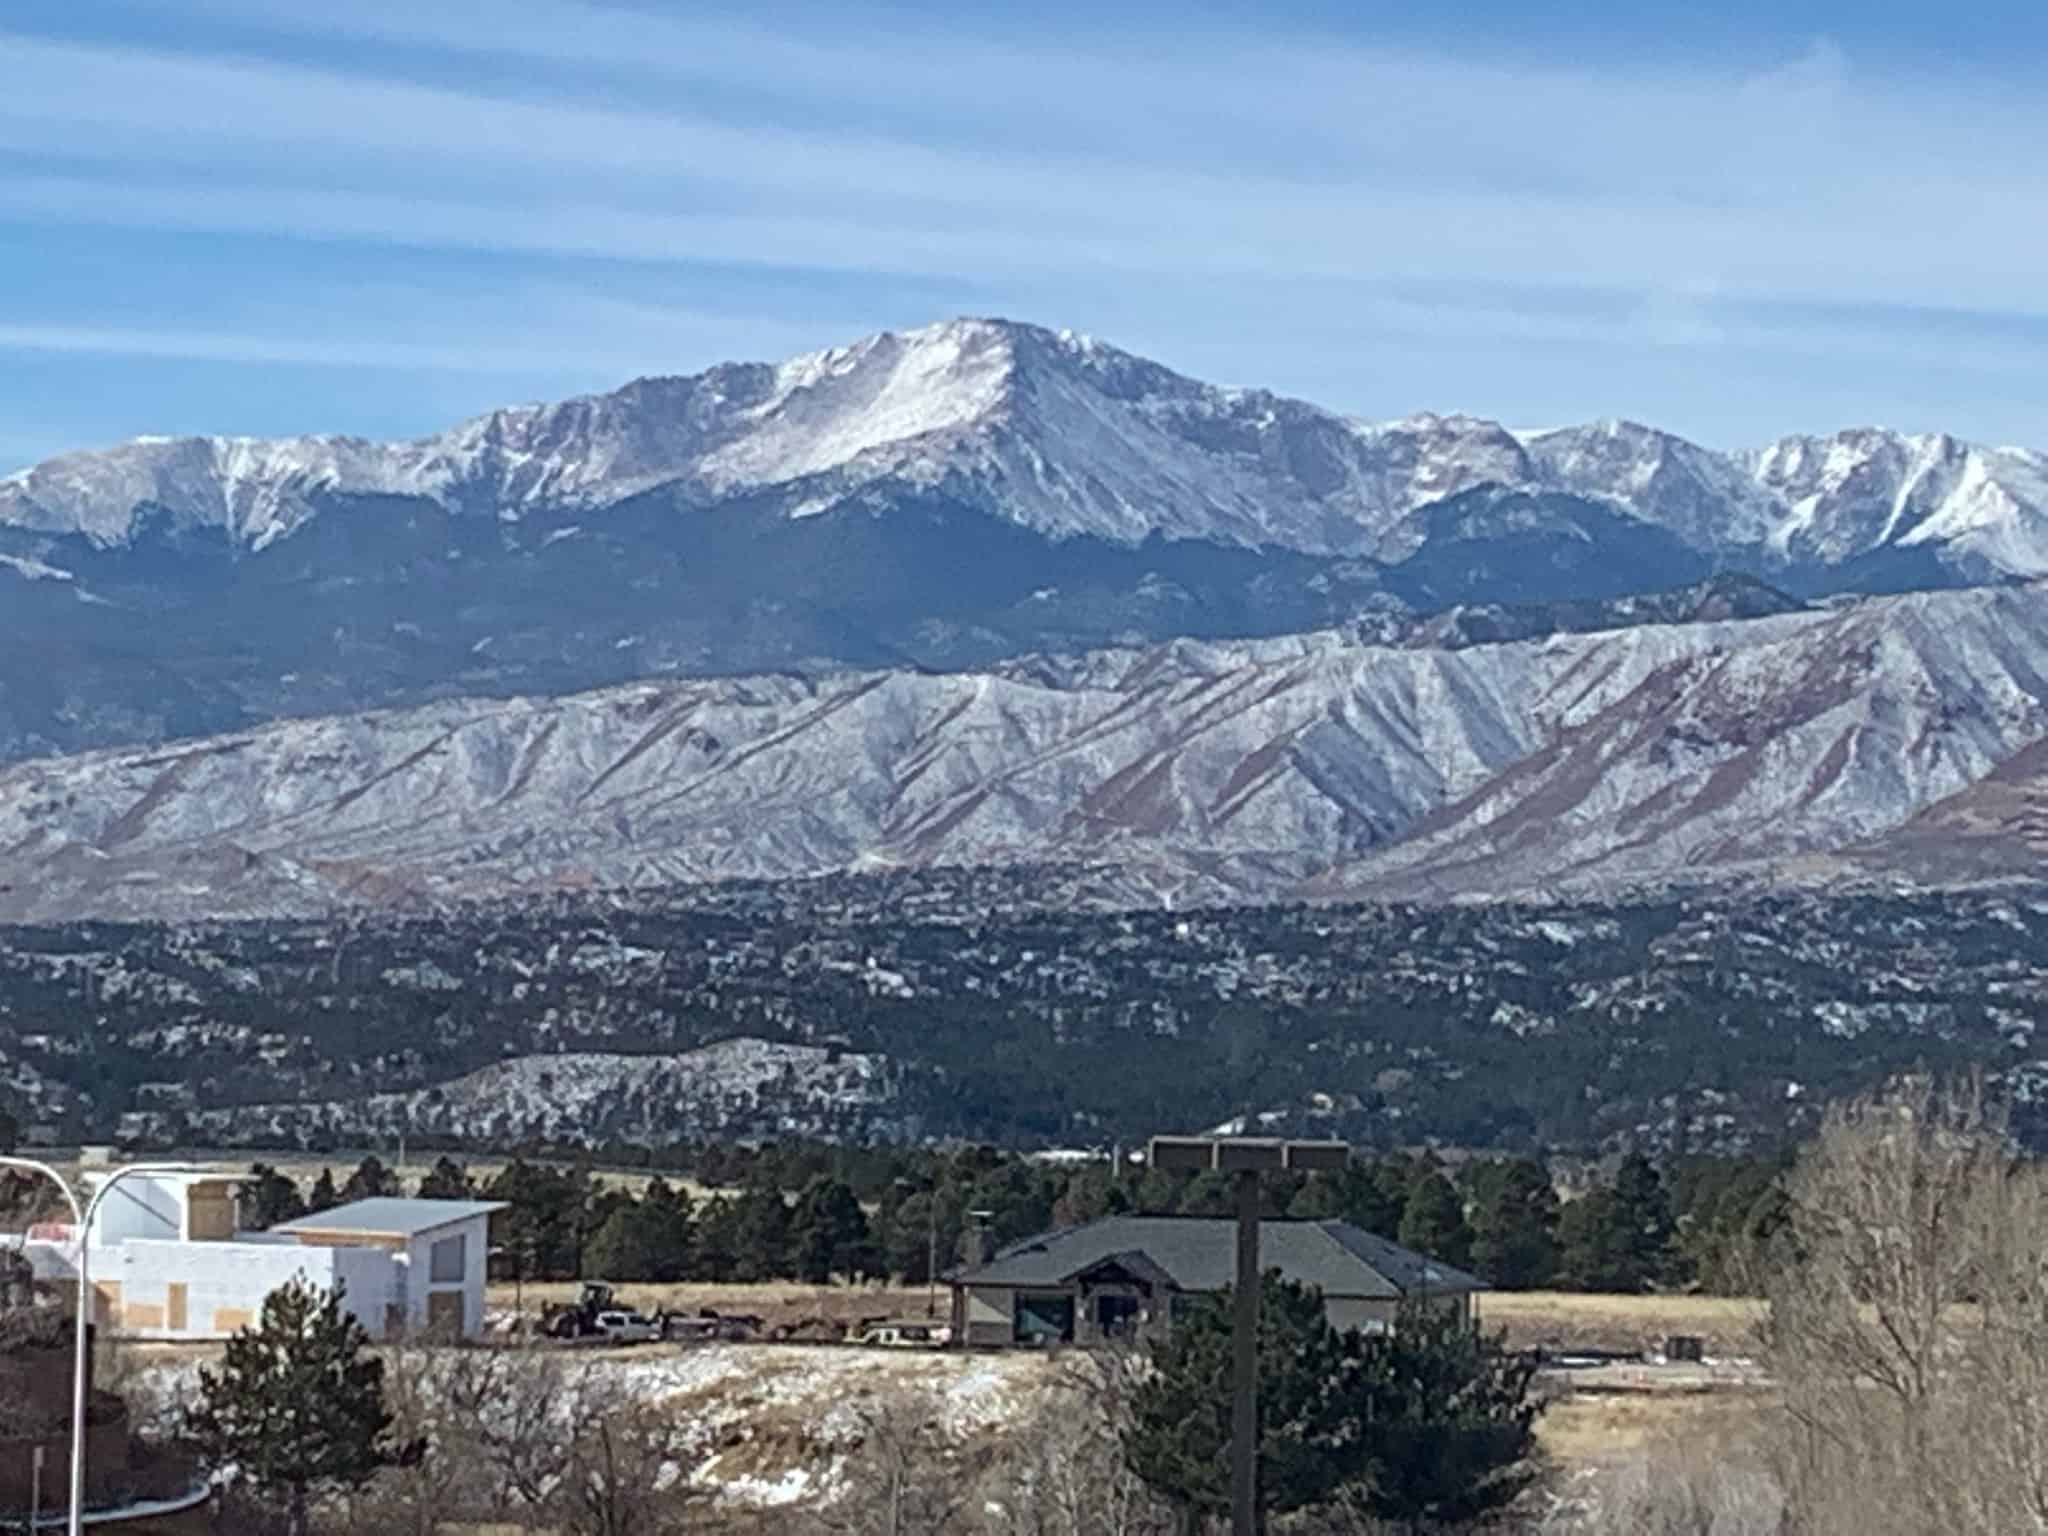 View of mountains in Colorado